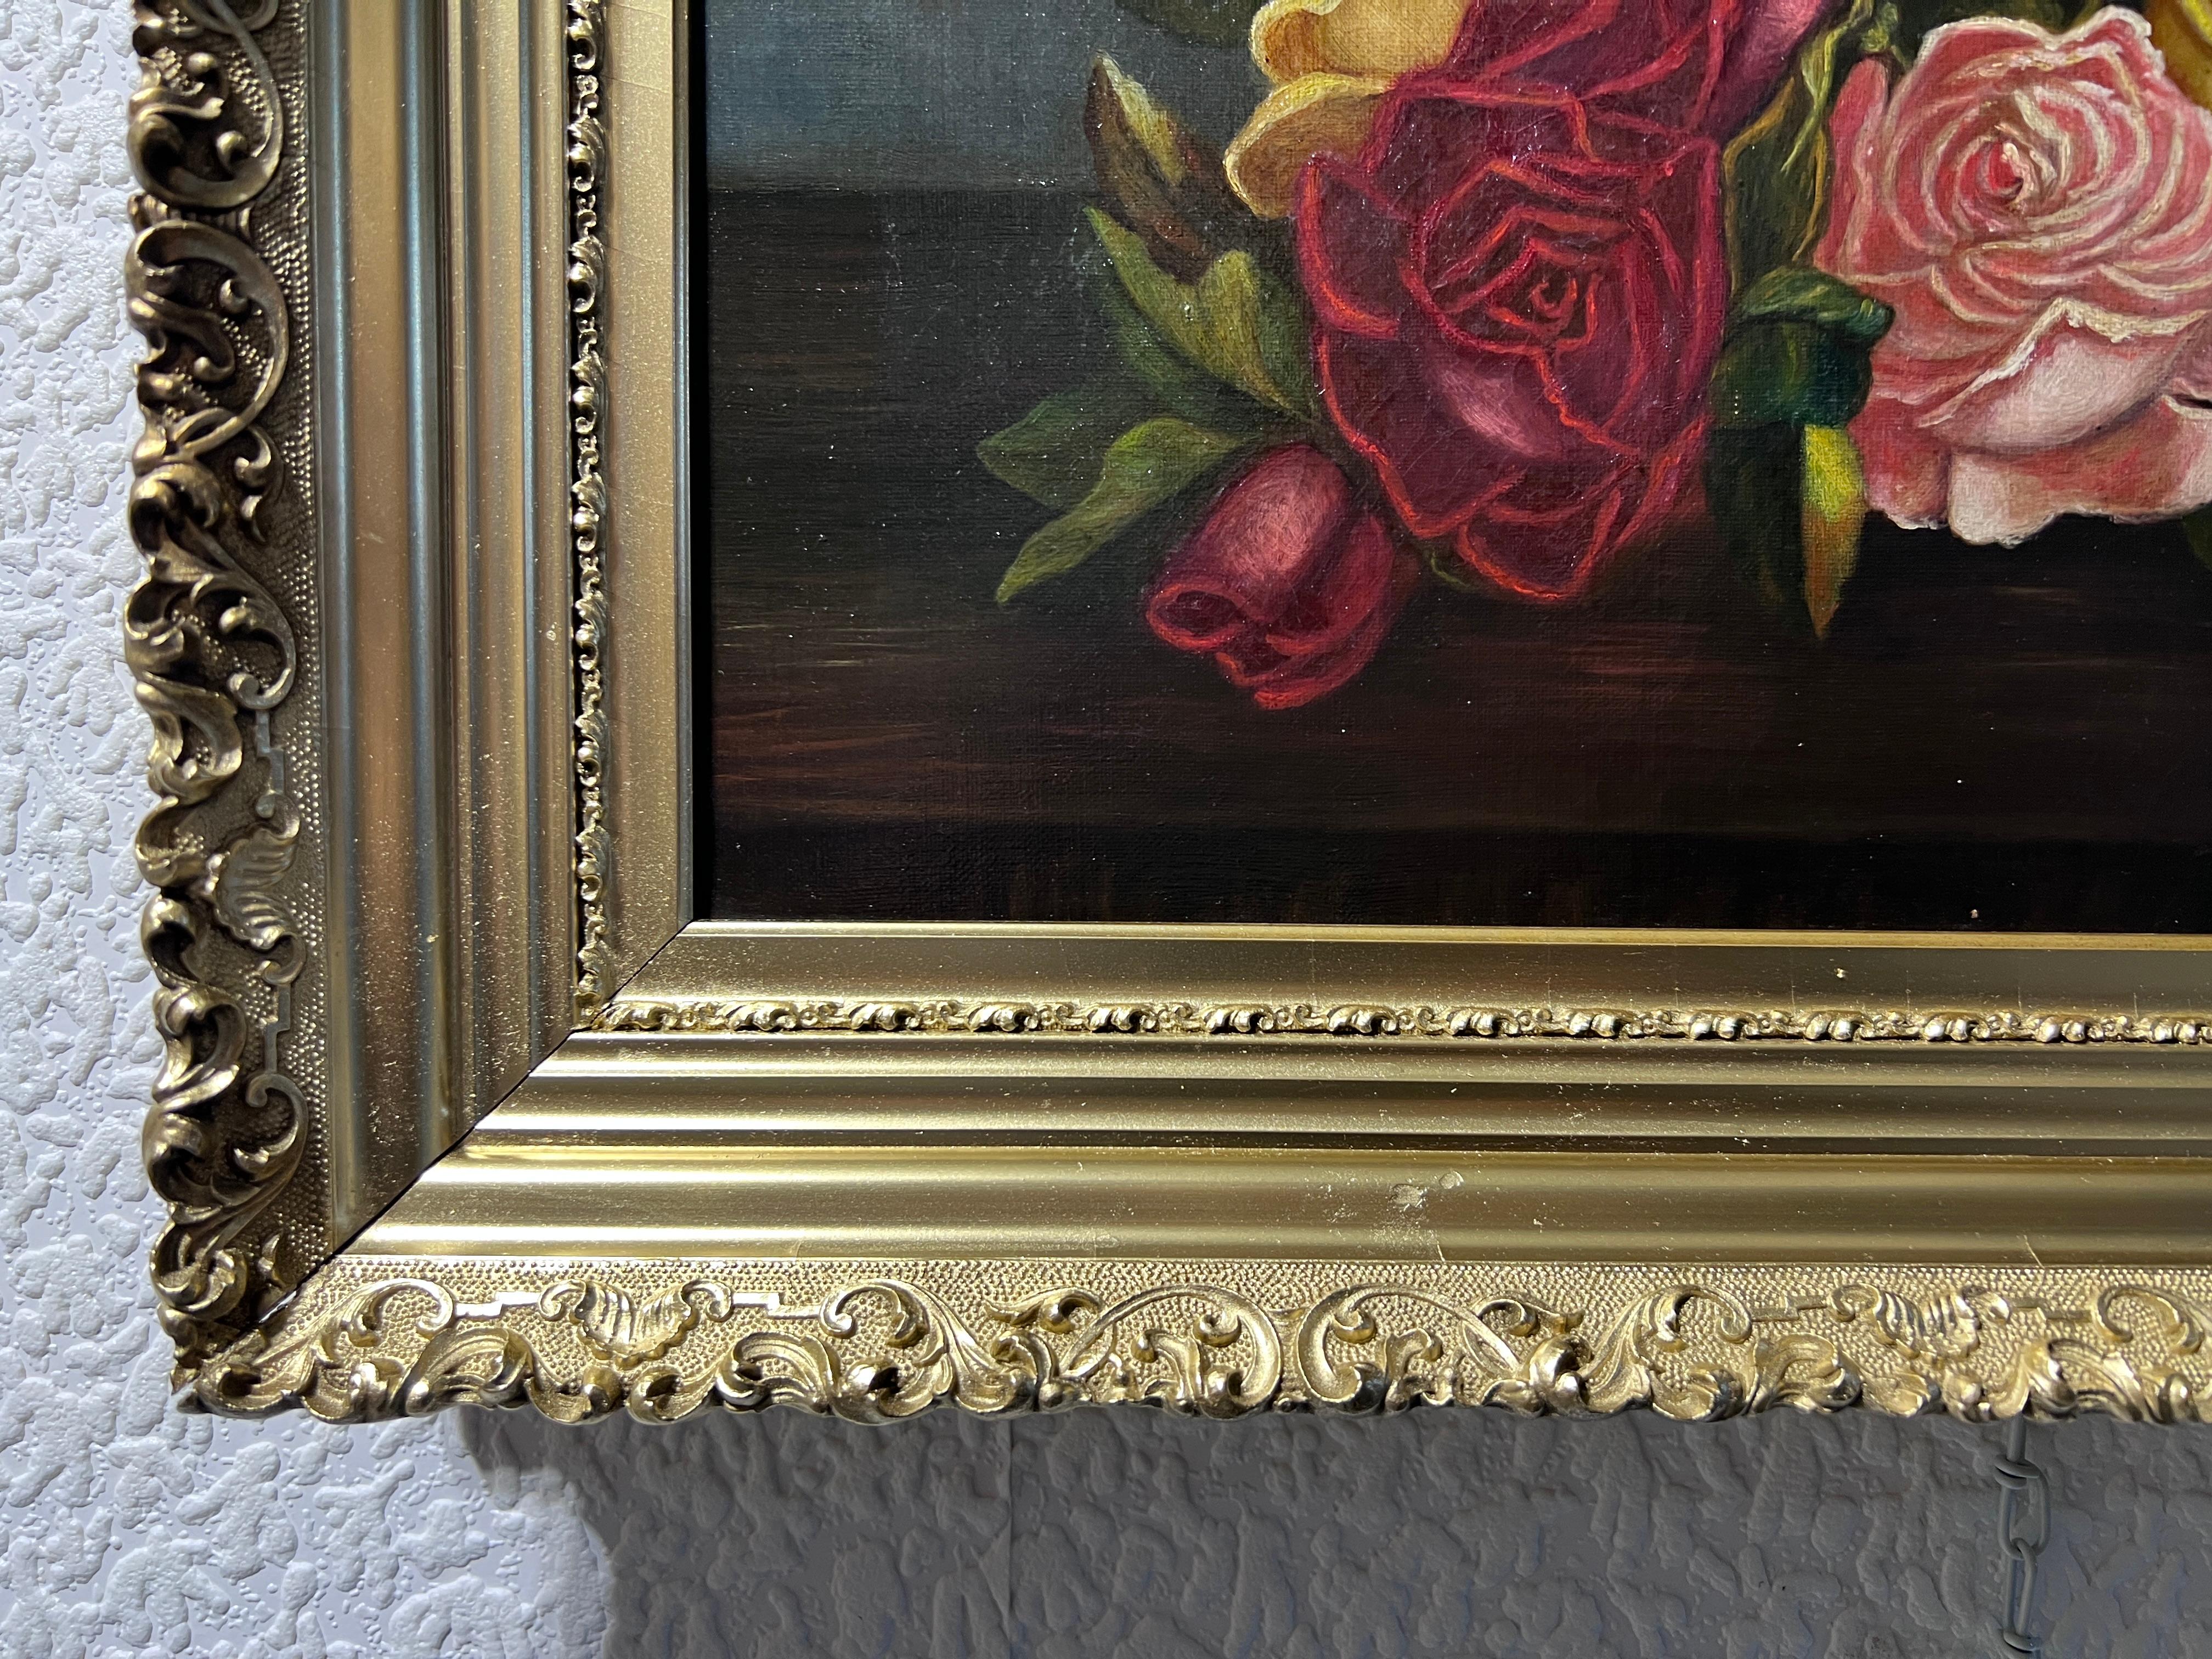 This is an original antique Still Life oil painting on canvas depicting a bouquet of a multicolor rose.

Presented in a period ornate gold frame.

Good condition.

No visible signatures.

Please see the photos, they are part of the description.